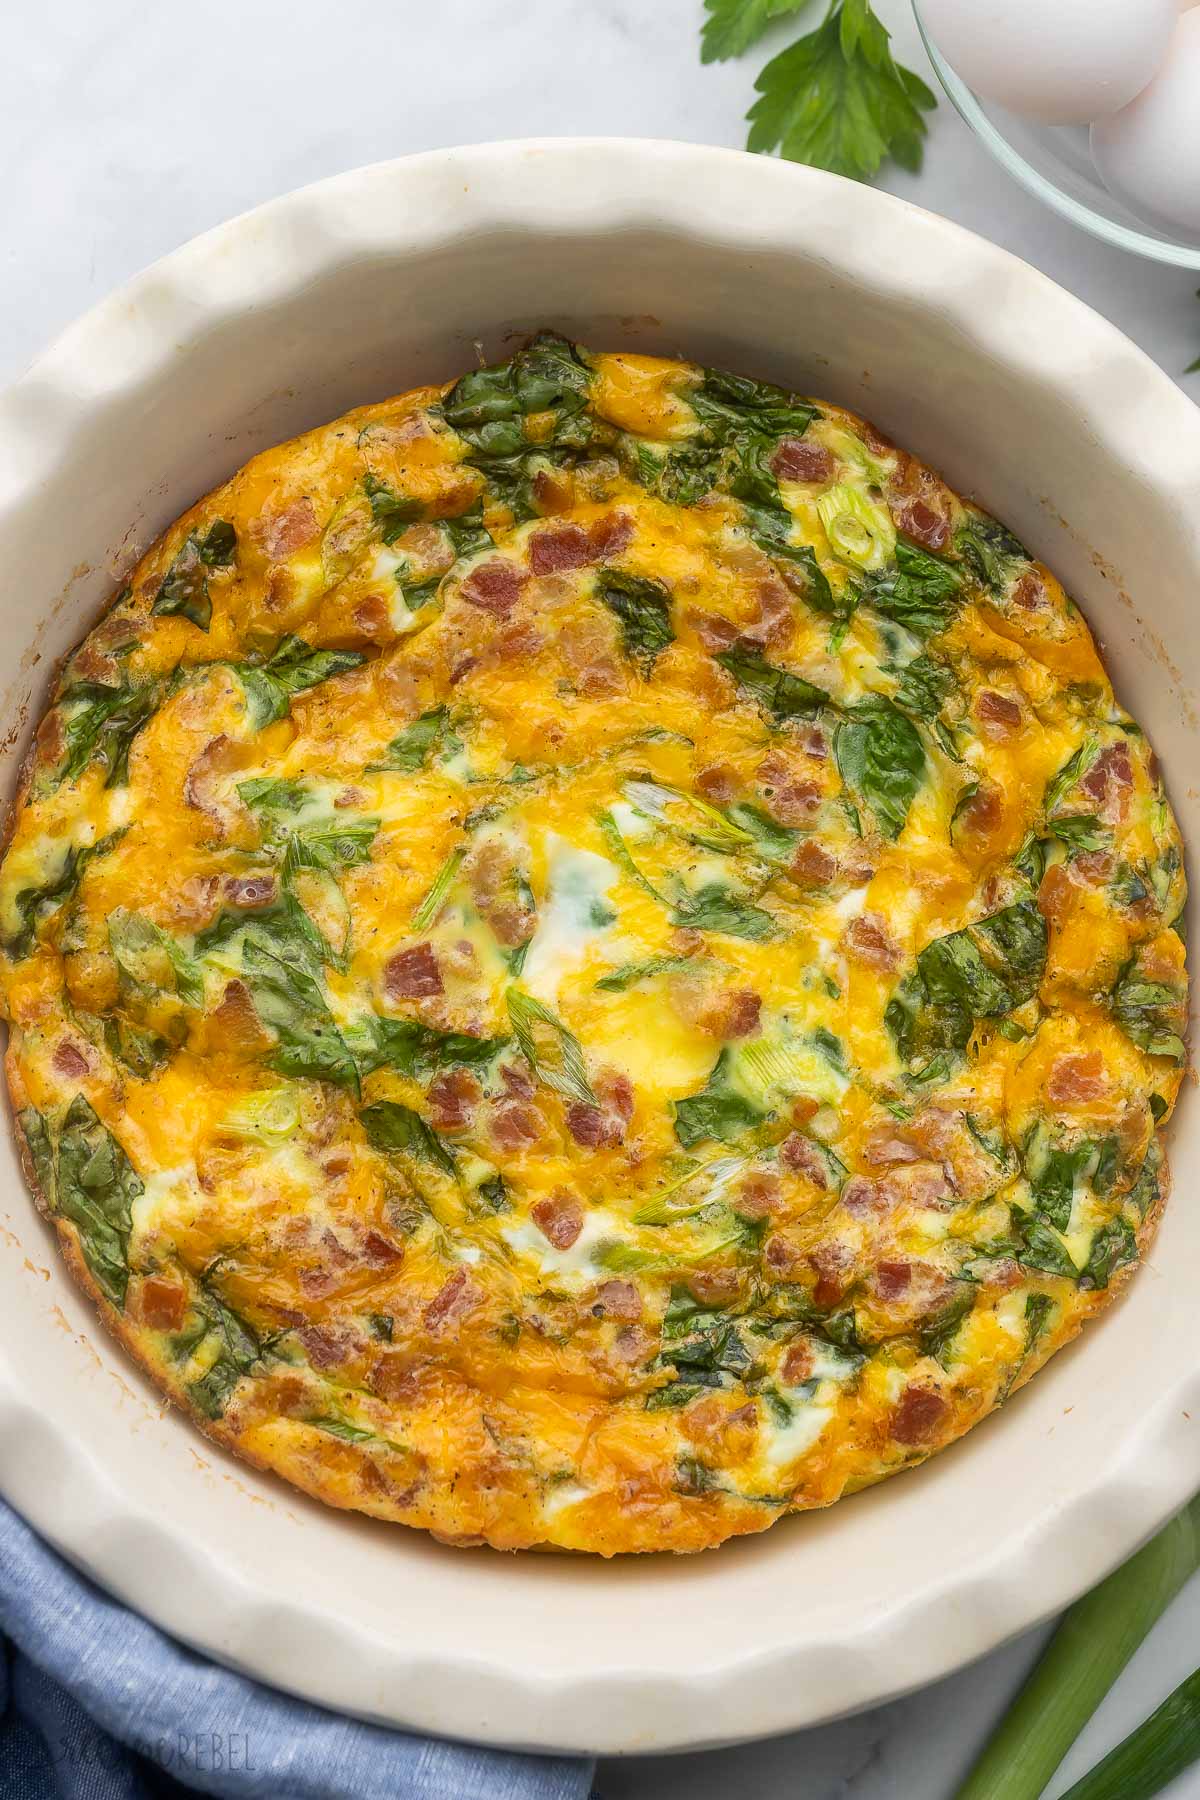 Top view of unsliced Crustless Quiche in a dish.